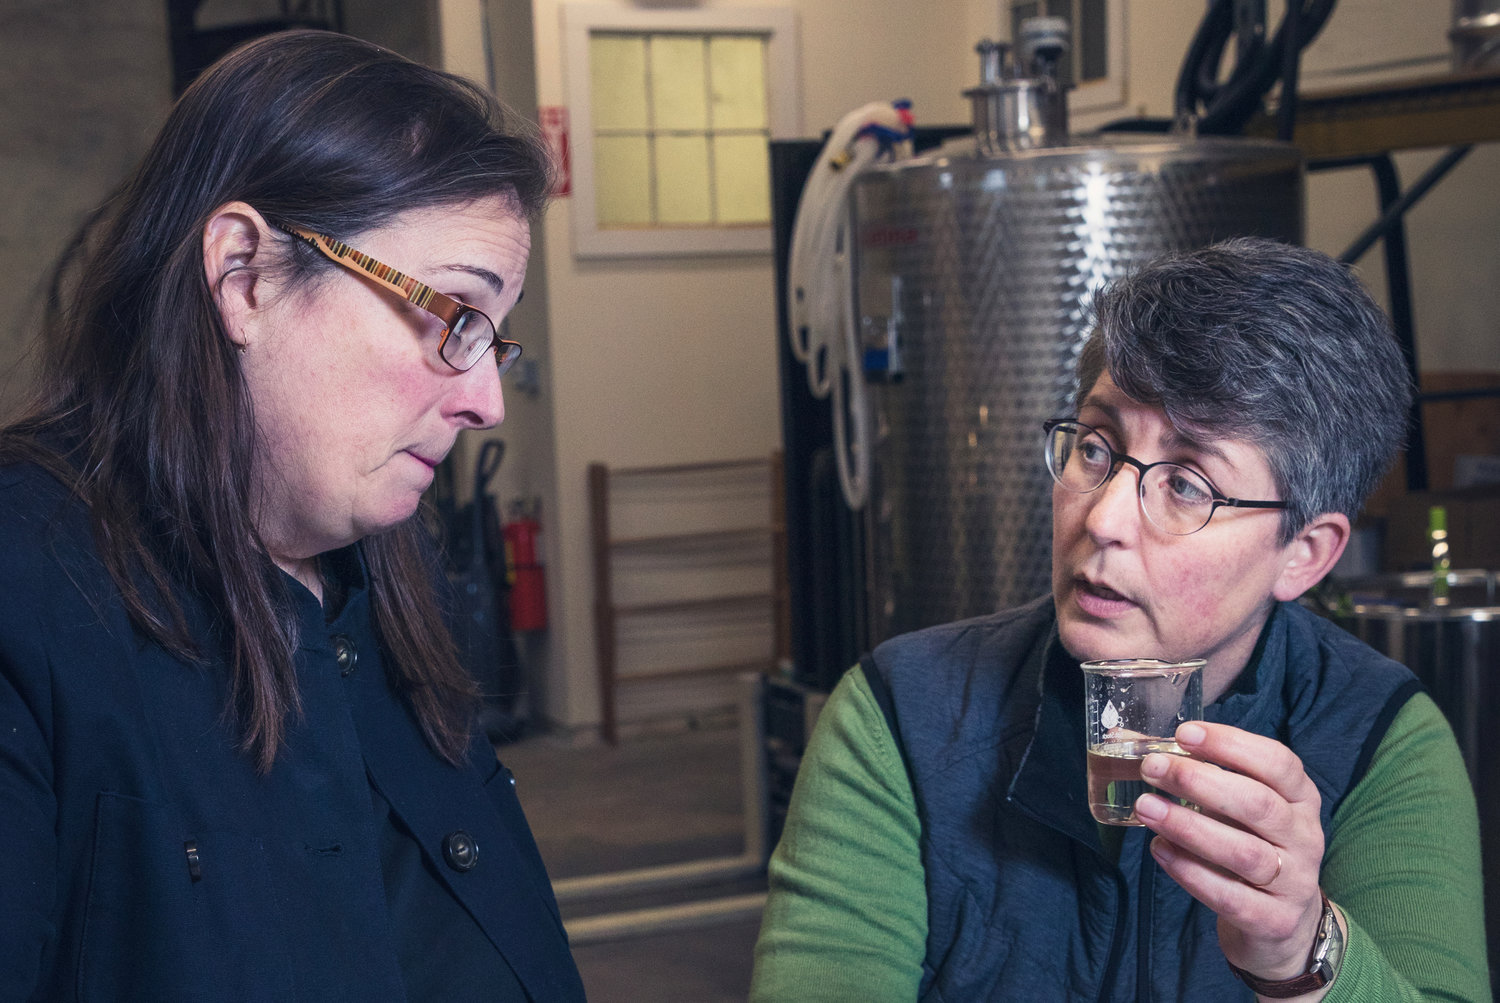 Owners Cathy Plourde and Kara Larson are meticulous about their product and operation